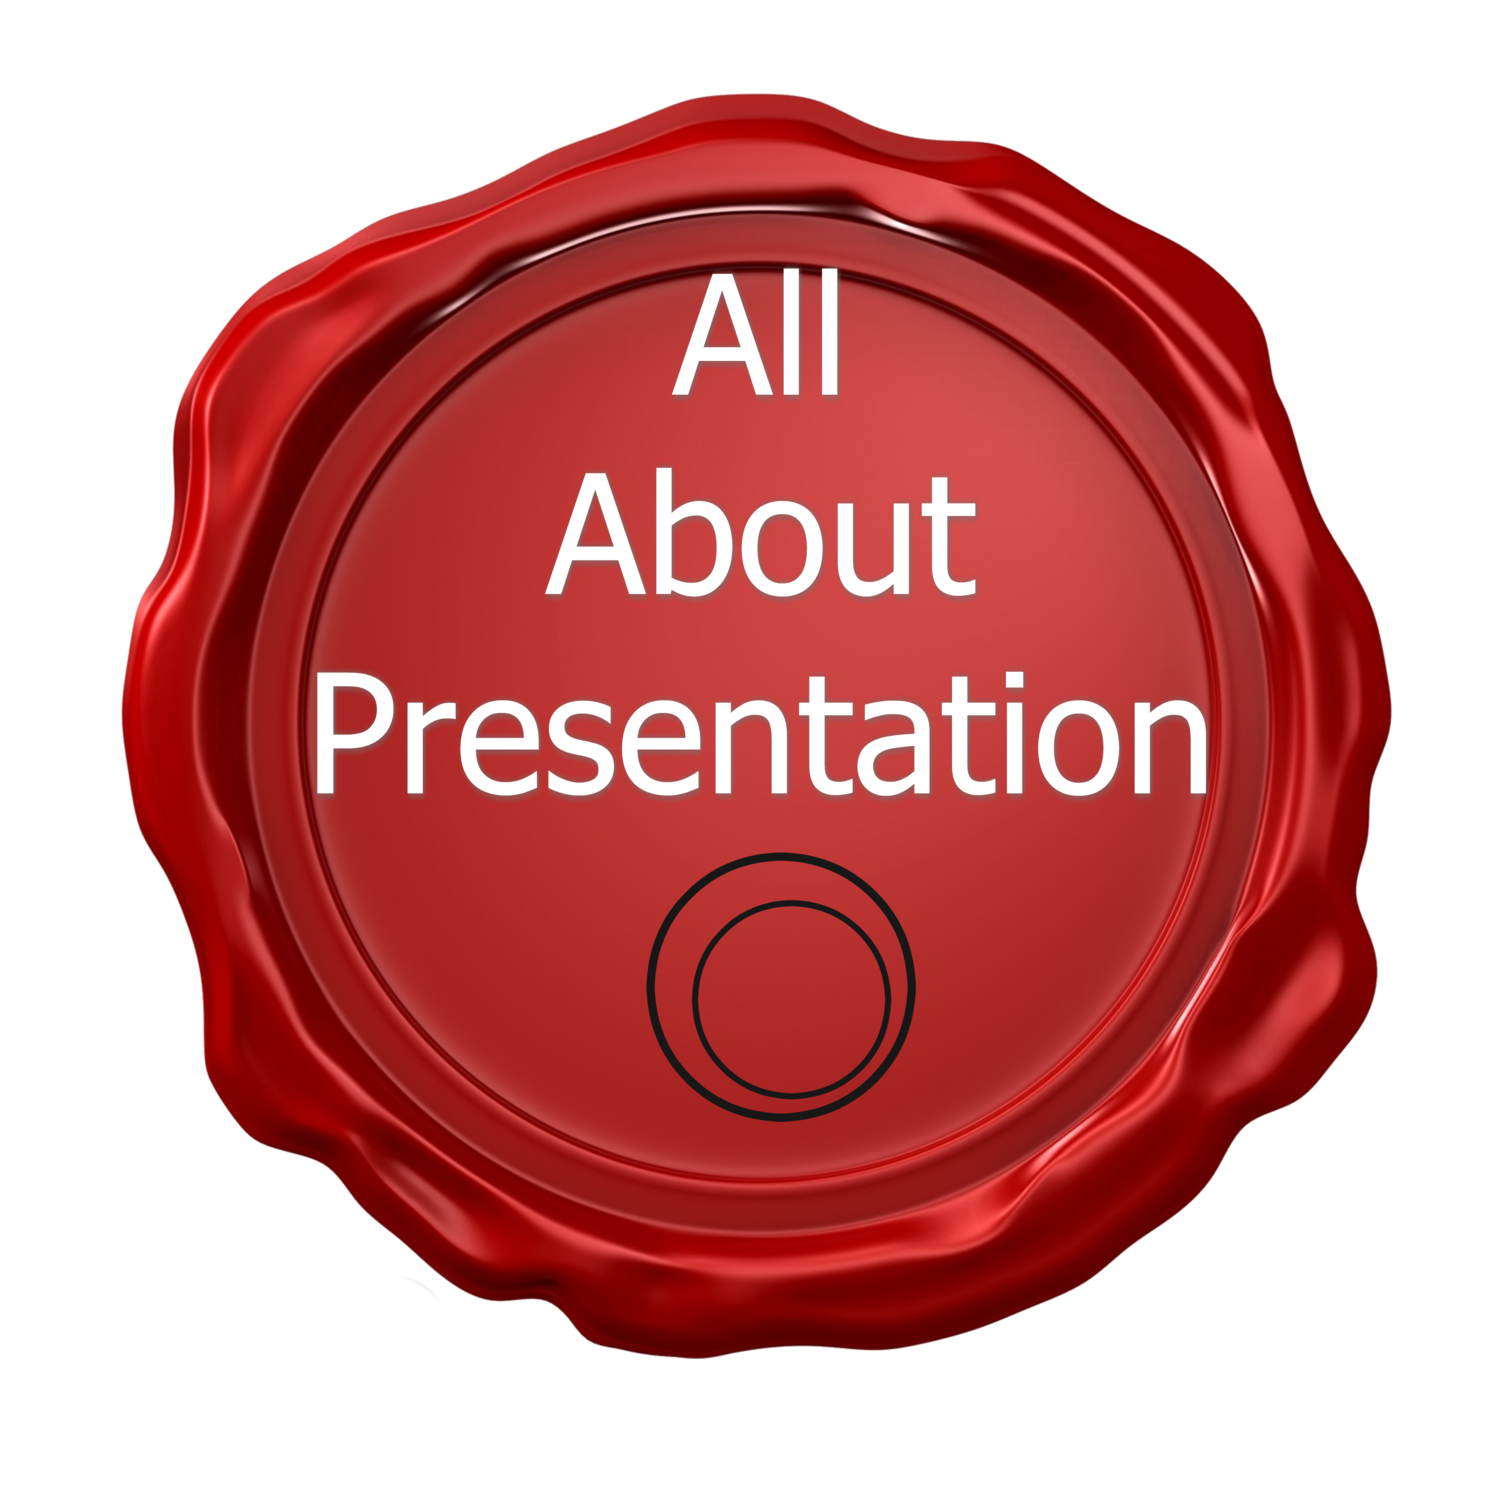 All About Presentation